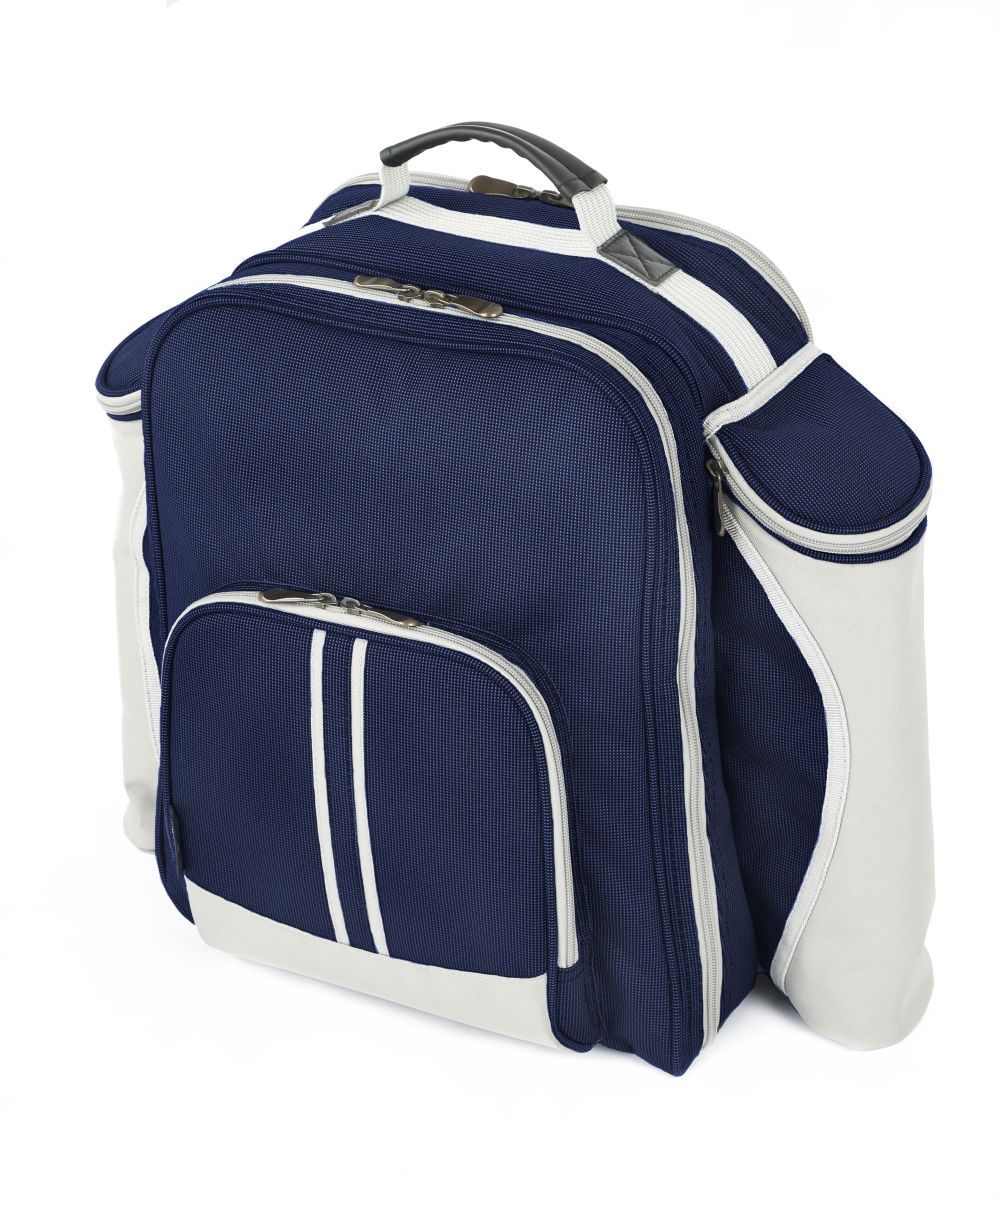 Greenfield Collection Super Deluxe Picnic Backpack Hamper for 2 People - Navy - Holiday Accent Ltd